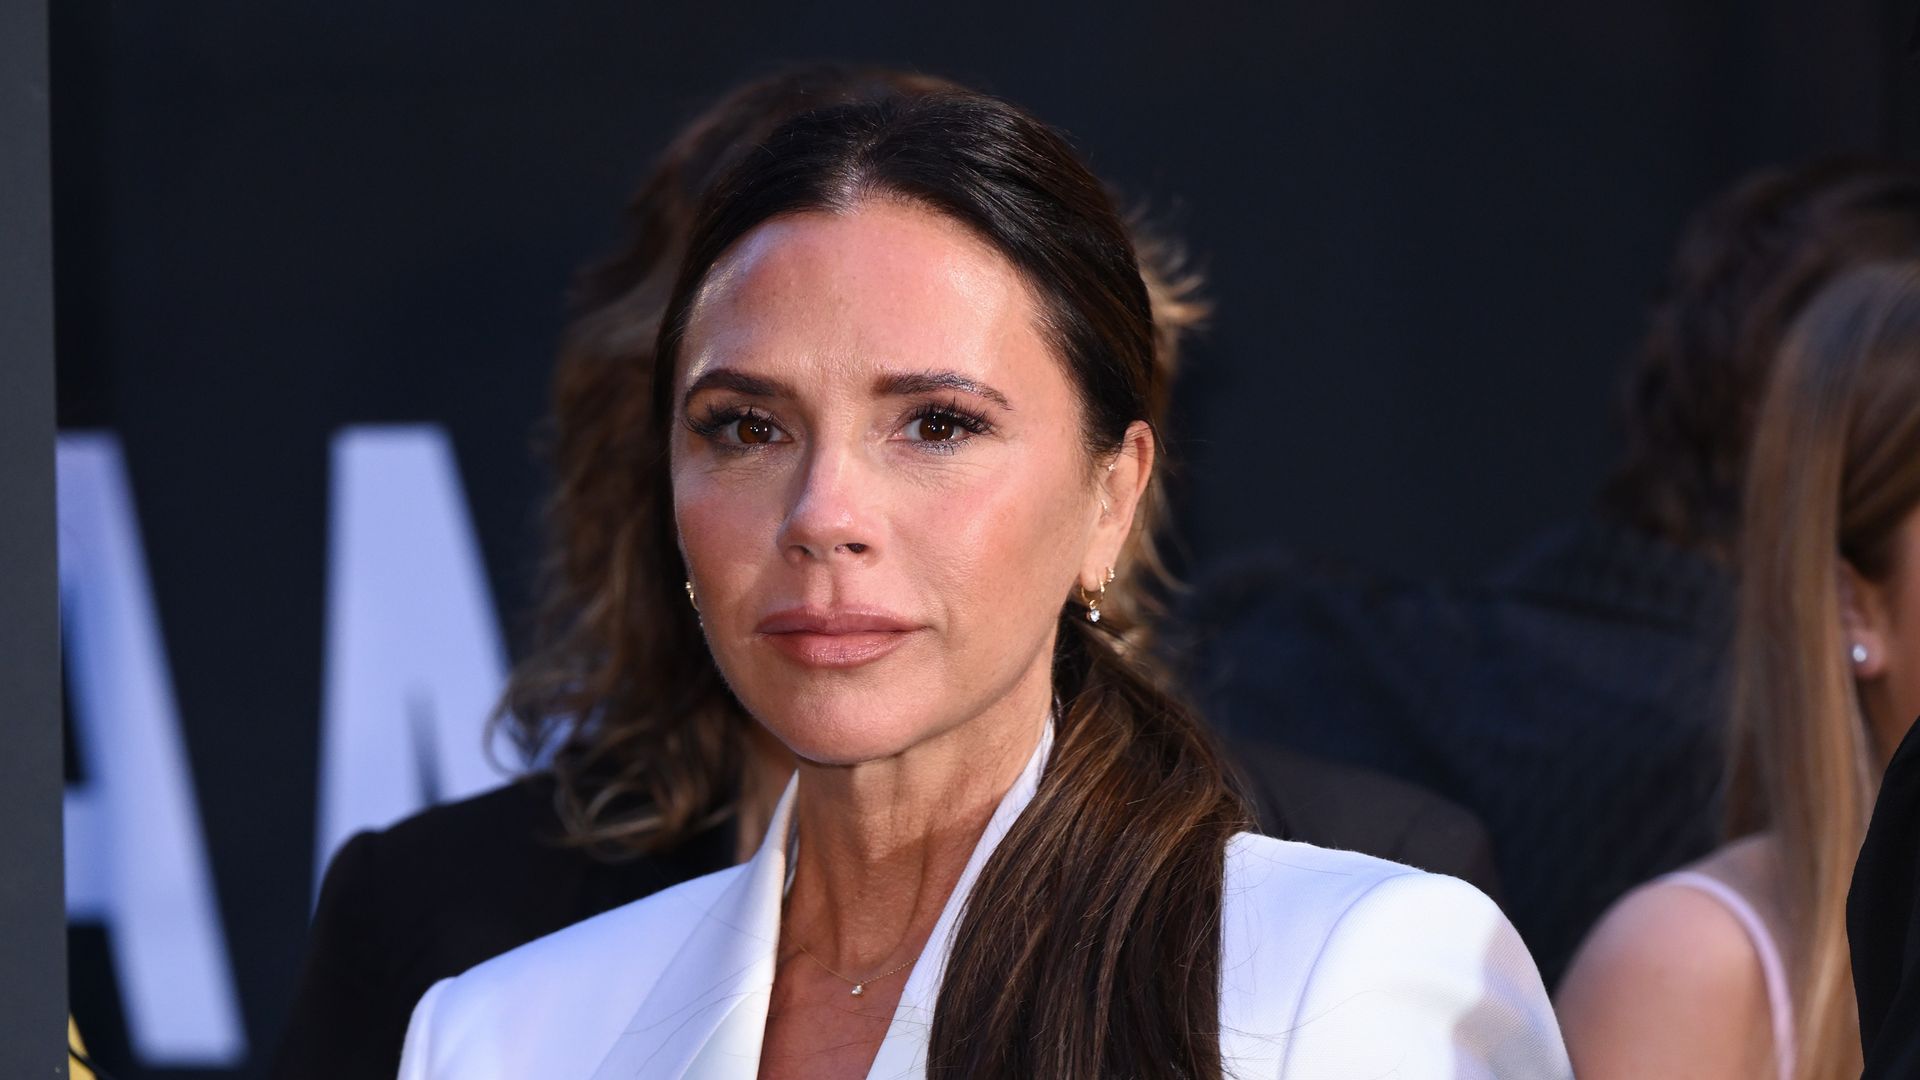 LONDON, ENGLAND - OCTOBER 03: Victoria Beckham attends the Netflix 'Beckham' UK Premiere at The Curzon Mayfair on October 03, 2023 in London, England. (Photo by Karwai Tang/WireImage)